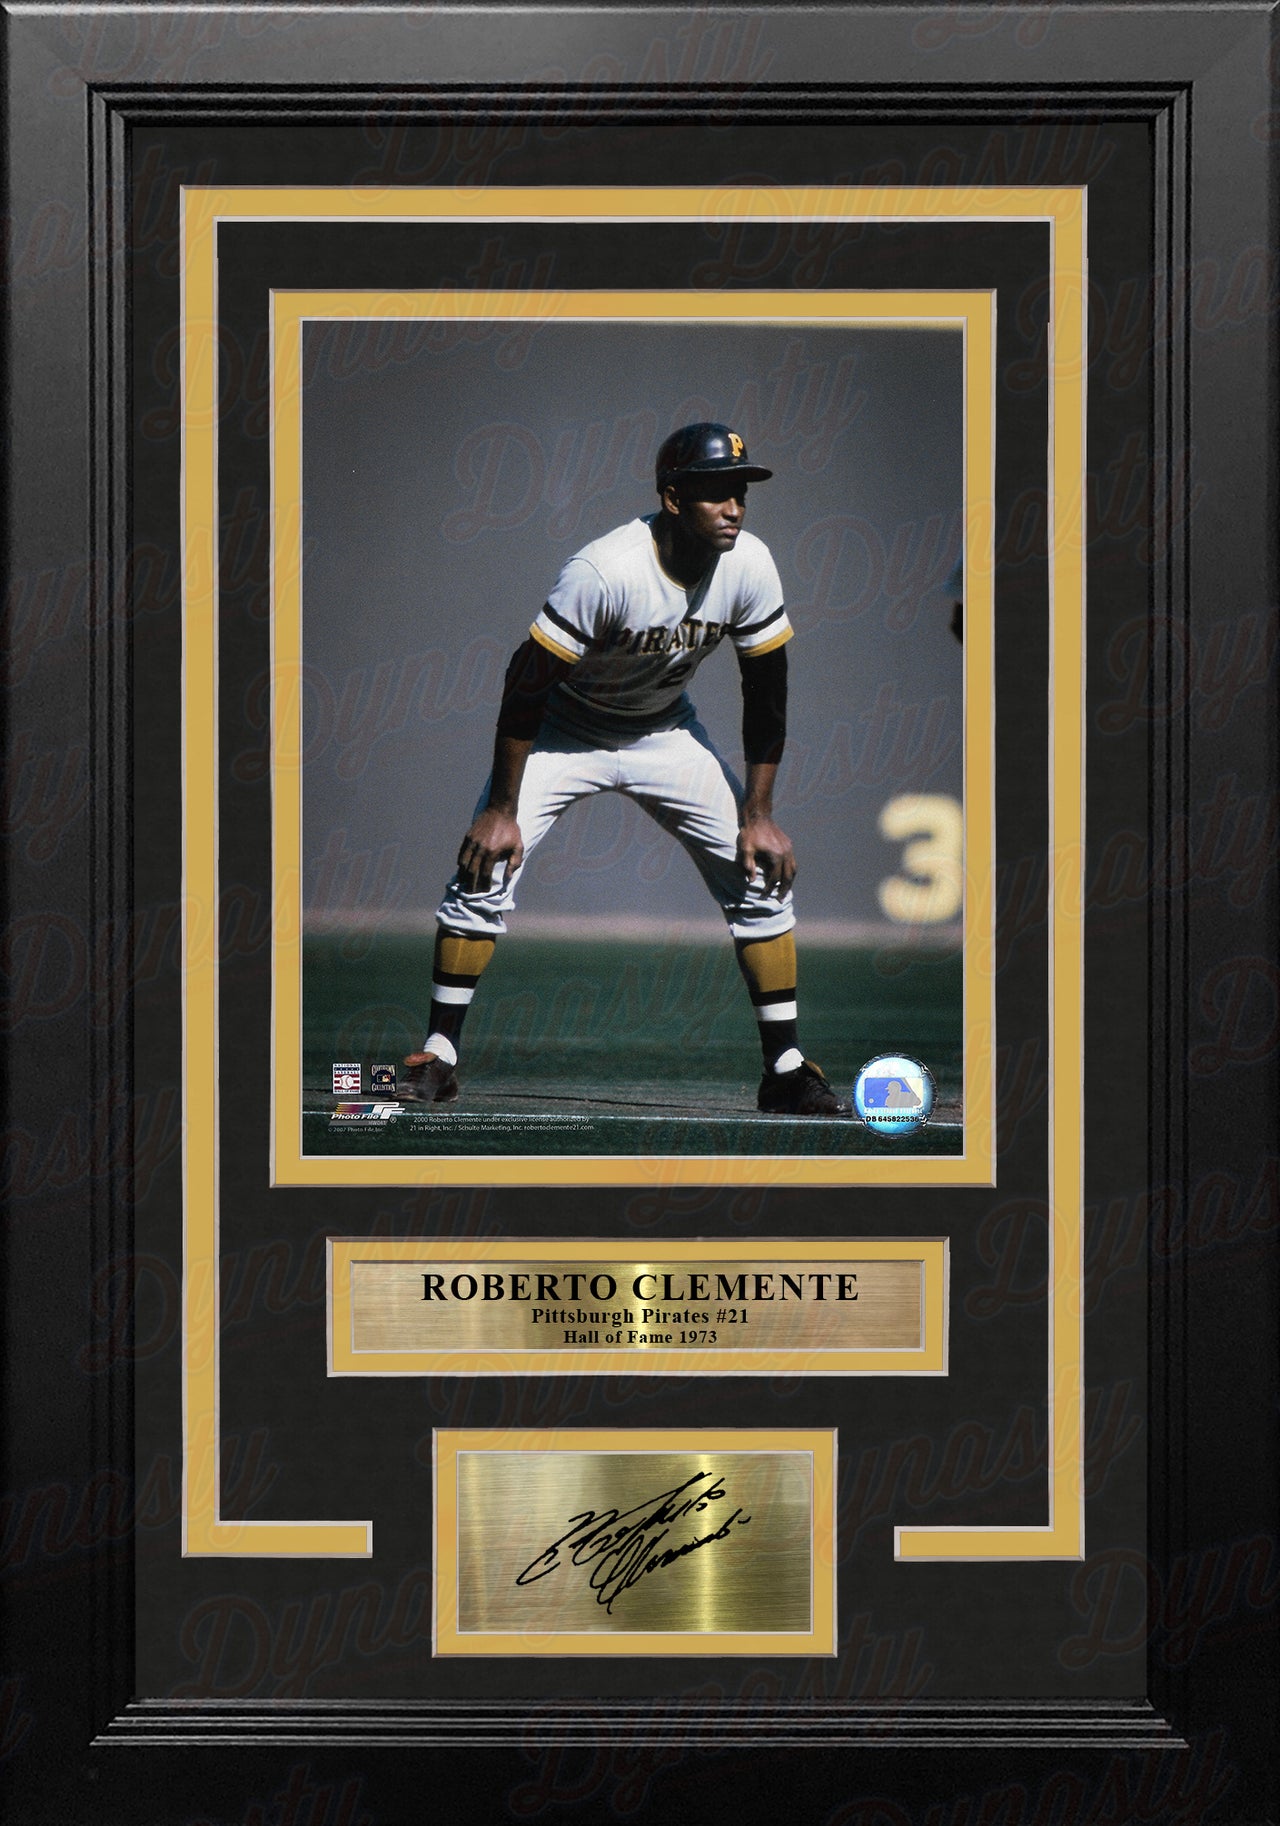 Roberto Clemente On Base Pittsburgh Pirates 8" x 10" Framed Baseball Photo with Engraved Autograph - Dynasty Sports & Framing 